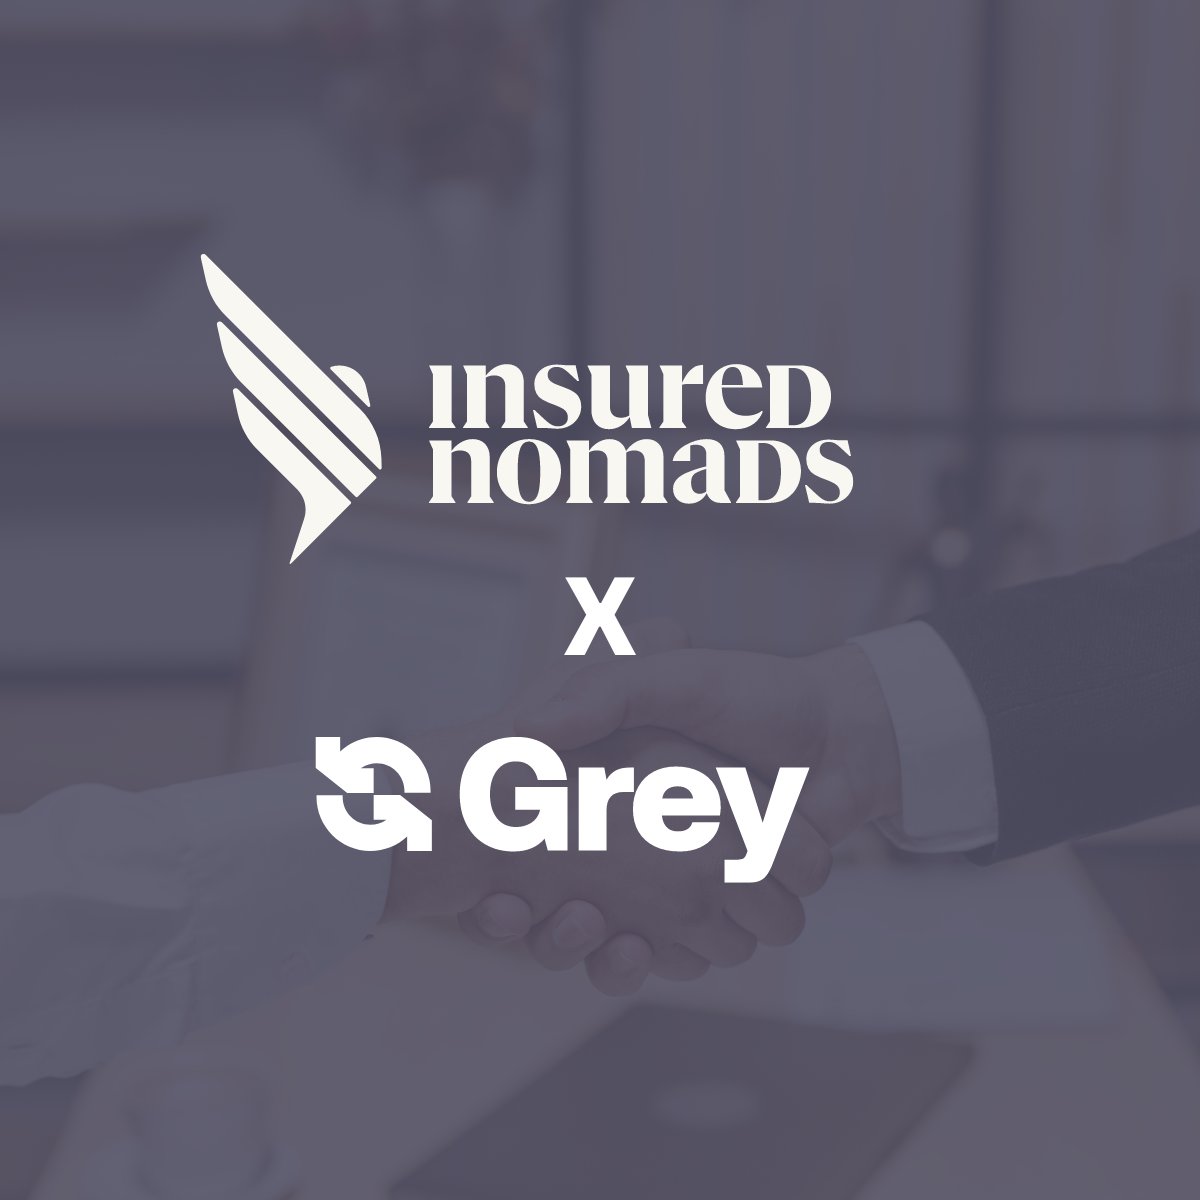 Exciting News for Modern Travelers & Digital Nomads!  We are teaming up with @Greyfinance to revolutionize travel medical protection and global banking for the adventurous spirit in all of us  

#DigitalNomads #RemoteWork #TravelInsurance #GlobalBanking #Innovation #Partnership